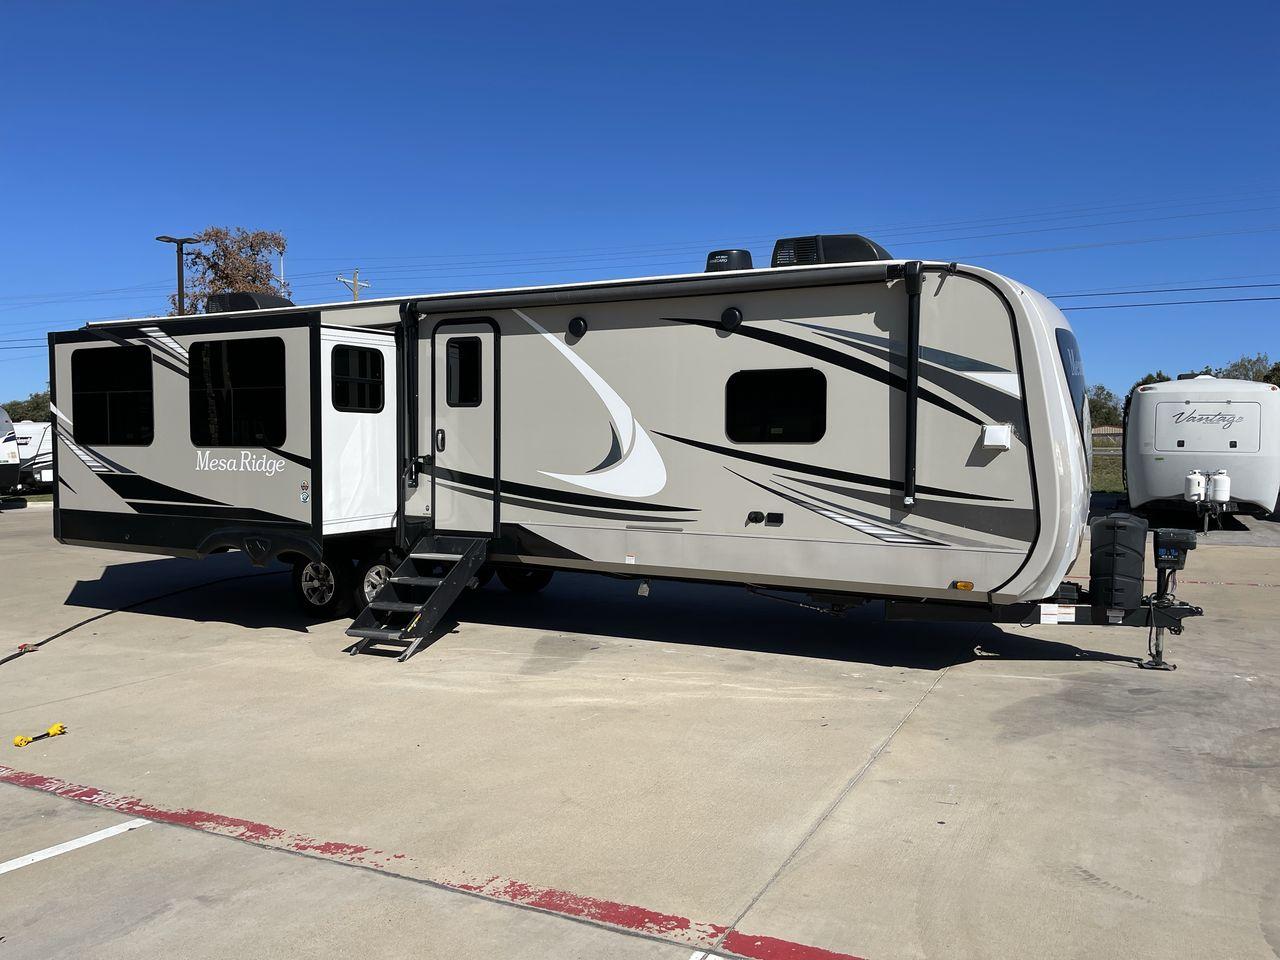 2022 HIGHLAND RIDGE MESA RIDGE 323RLS (58TBH0BT6N3) , Length: 37.8 ft | Dry Weight: 8,890 lbs | Gross Weight: 11,400 lbs | Slides: 3 transmission, located at 4319 N Main Street, Cleburne, TX, 76033, (817) 221-0660, 32.435829, -97.384178 - The 2022 Highland Ridge Mesa Ridge 323RLS delivers luxury and comfort on the road. This travel trailer is 37.8 feet long and has three slides, which provide plenty of room for relaxation and enjoyment. The center island with twin sinks and a free-standing dinette provides convenience and functionali - Photo #23